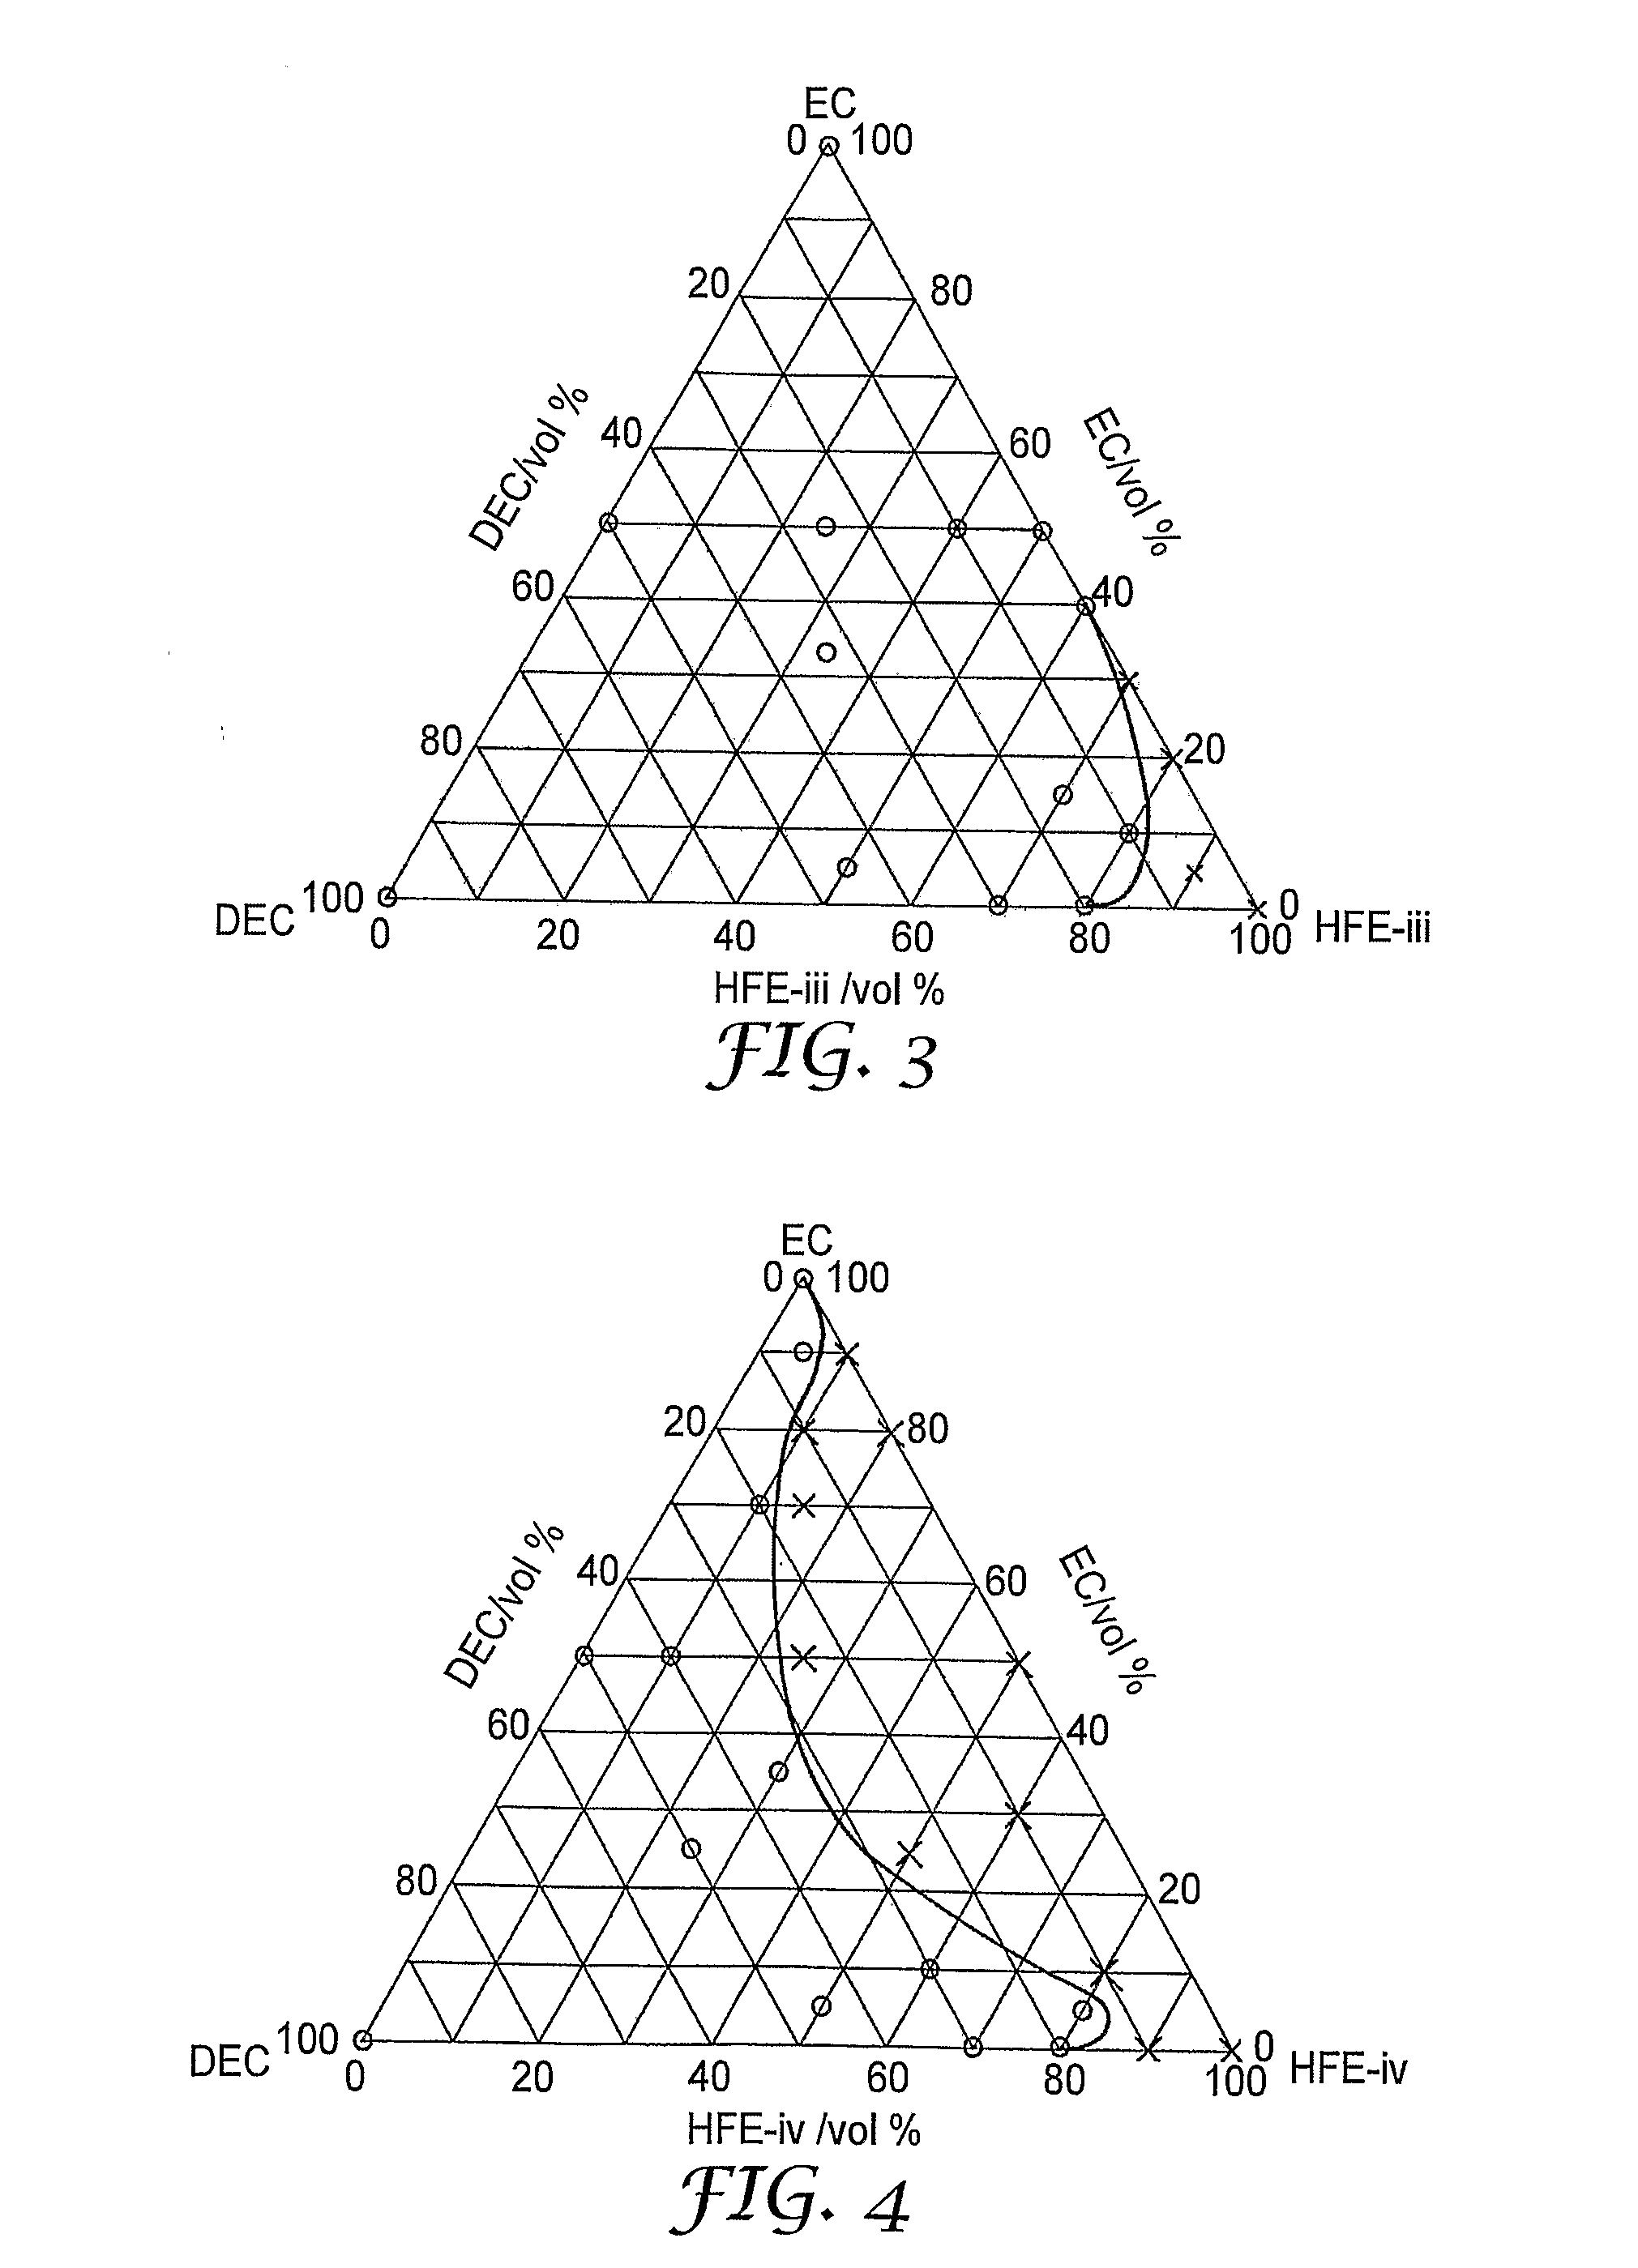 Electrolyte Solutions For Electrochemical Energy Devices